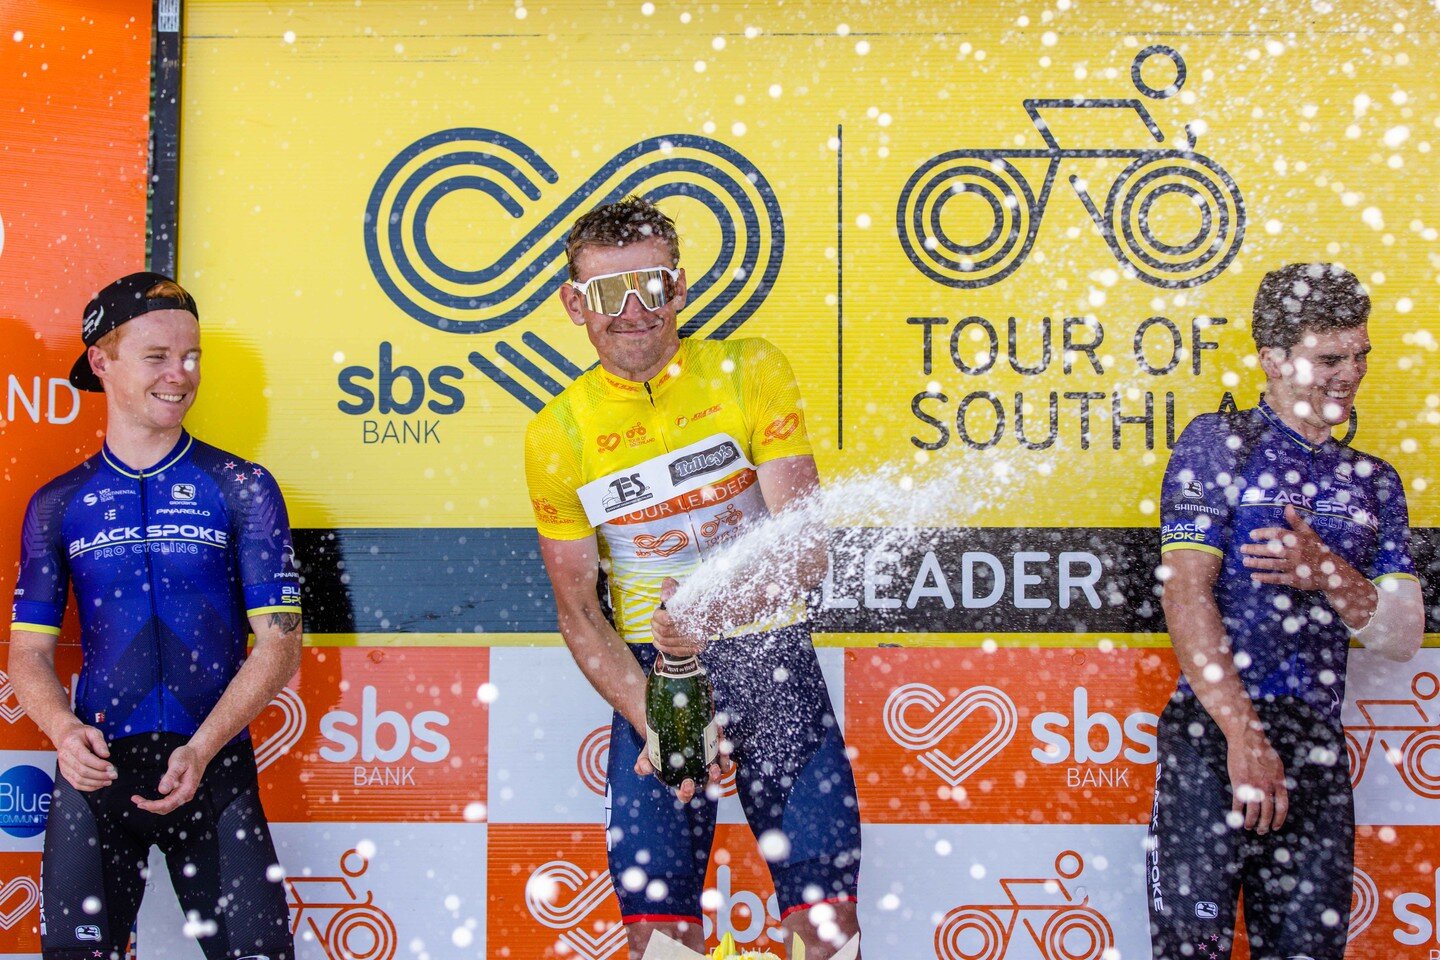 &ldquo;The SBS Bank Tour of Southland isn&rsquo;t just an iconic New Zealand bike race, riders tell stories about it around the world so it&rsquo;s great that we are finally able to welcome everyone back in 2023.&rdquo; Race director Sally Marr.
Link